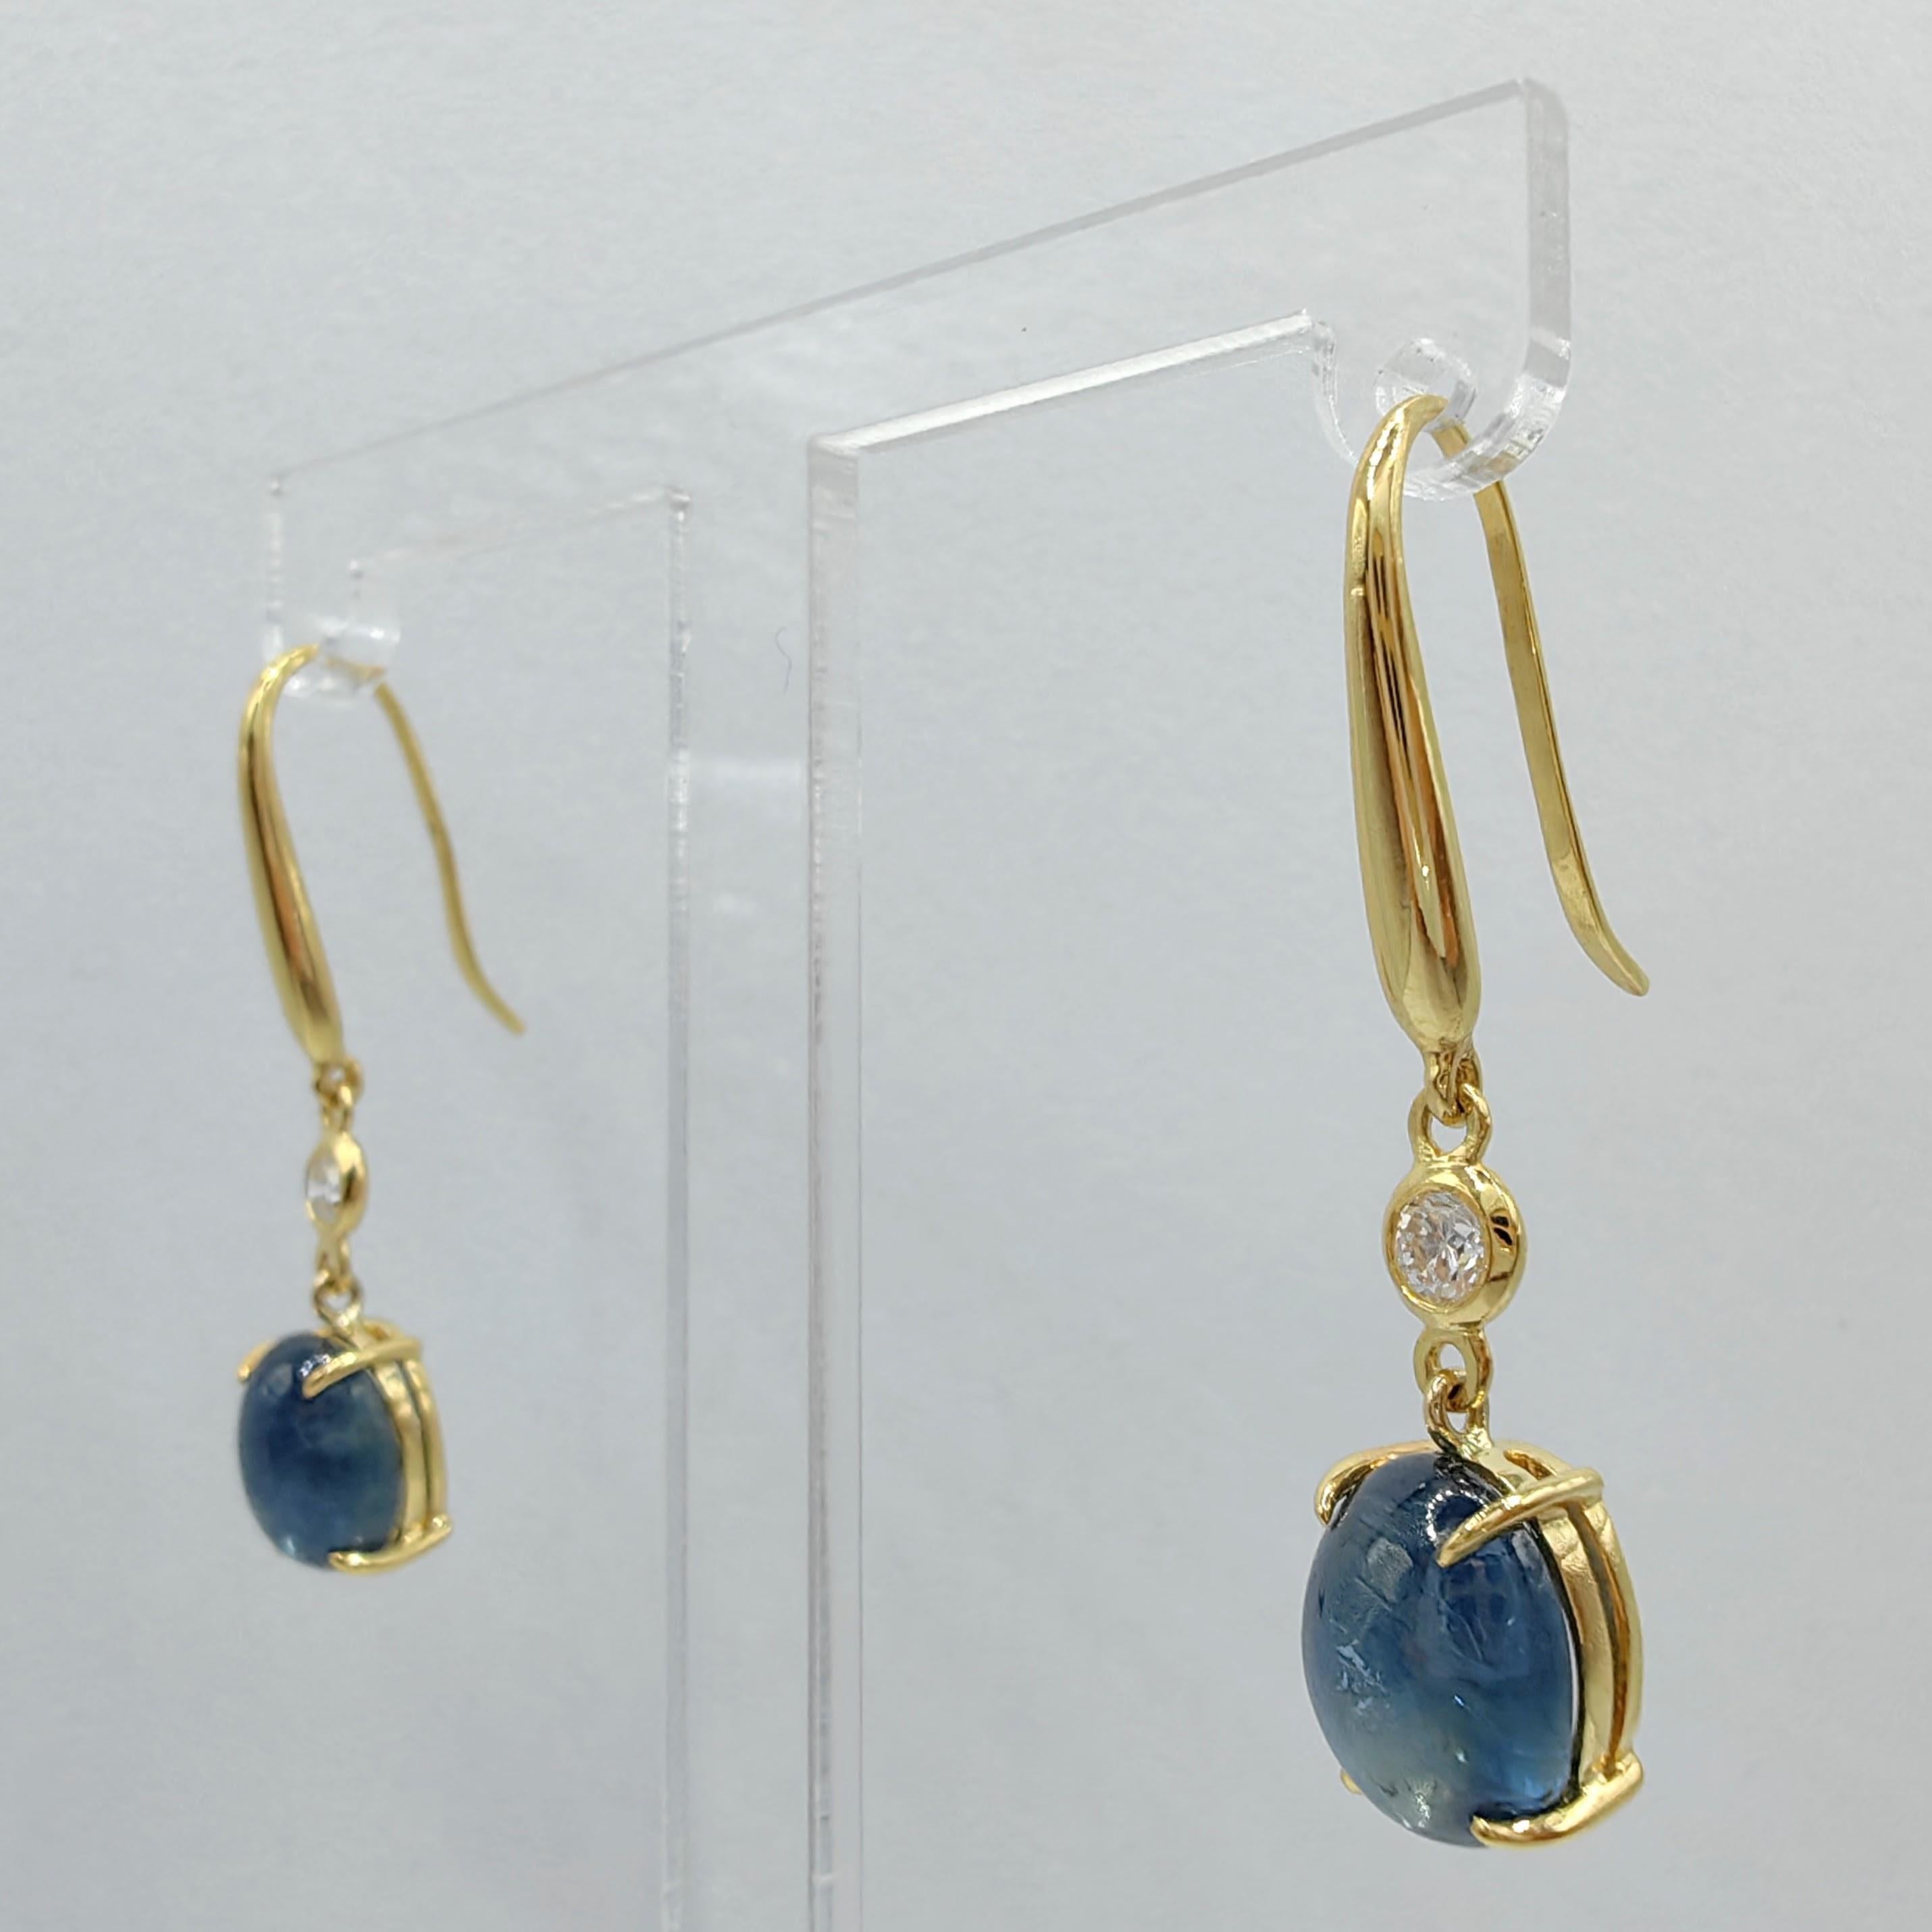 Contemporary 6.13ct Cabochon Blue Sapphire Diamond Dangling Earrings in 18K Yellow Gold For Sale